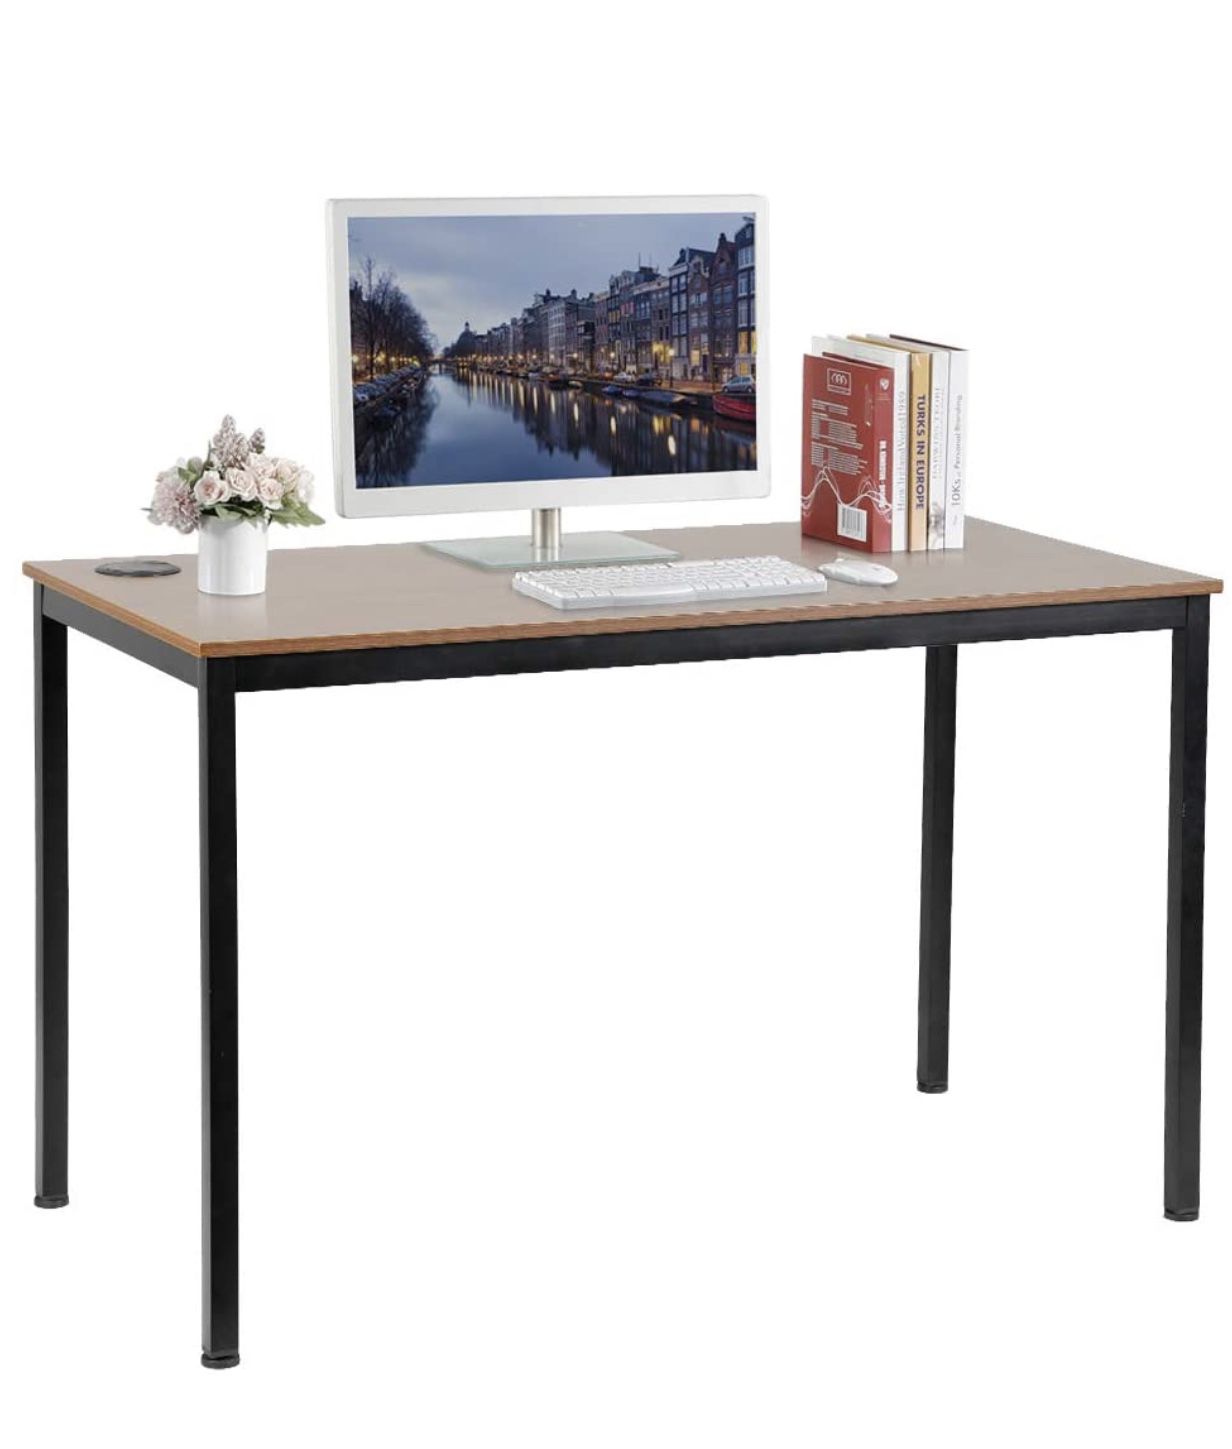 47 inch Simple Computer Desk for Home Office, Writing Table for Workstation, Teak Top